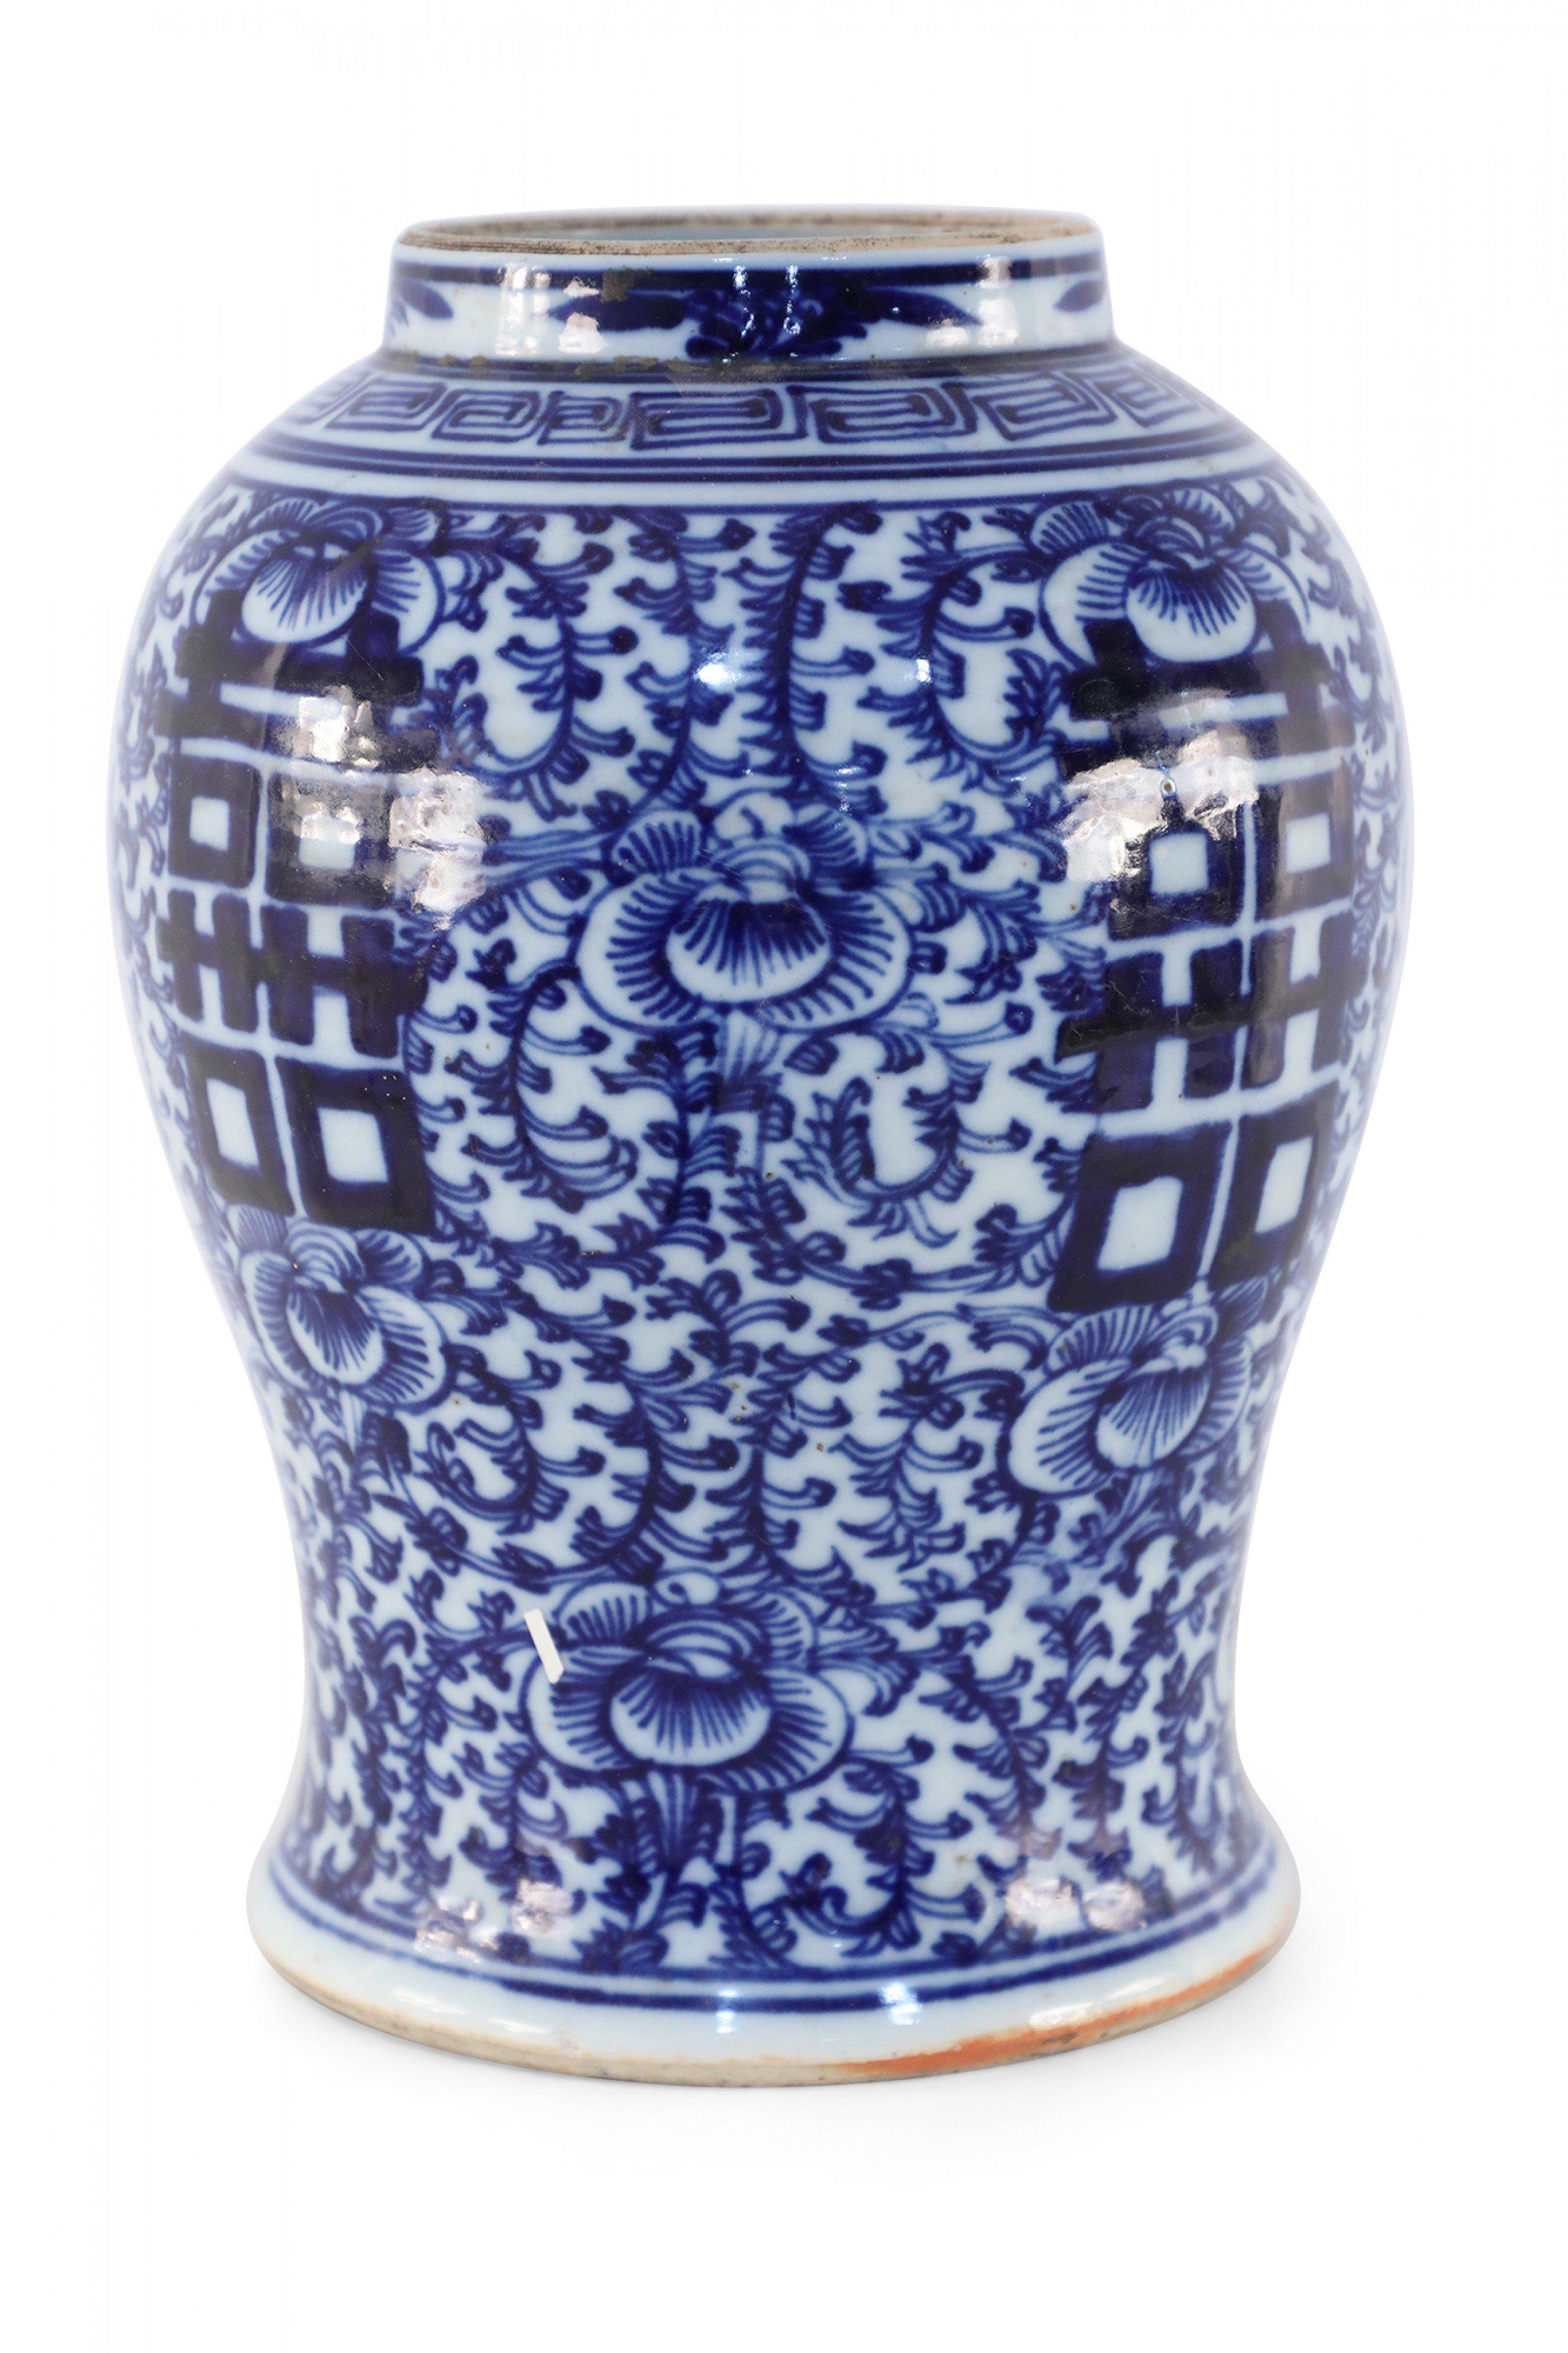 Antique Chinese (Early 20th Century) off-white porcelain vase with an urn form decorated in a navy blue vine and floral motifs and bold characters on 4 sides.
 